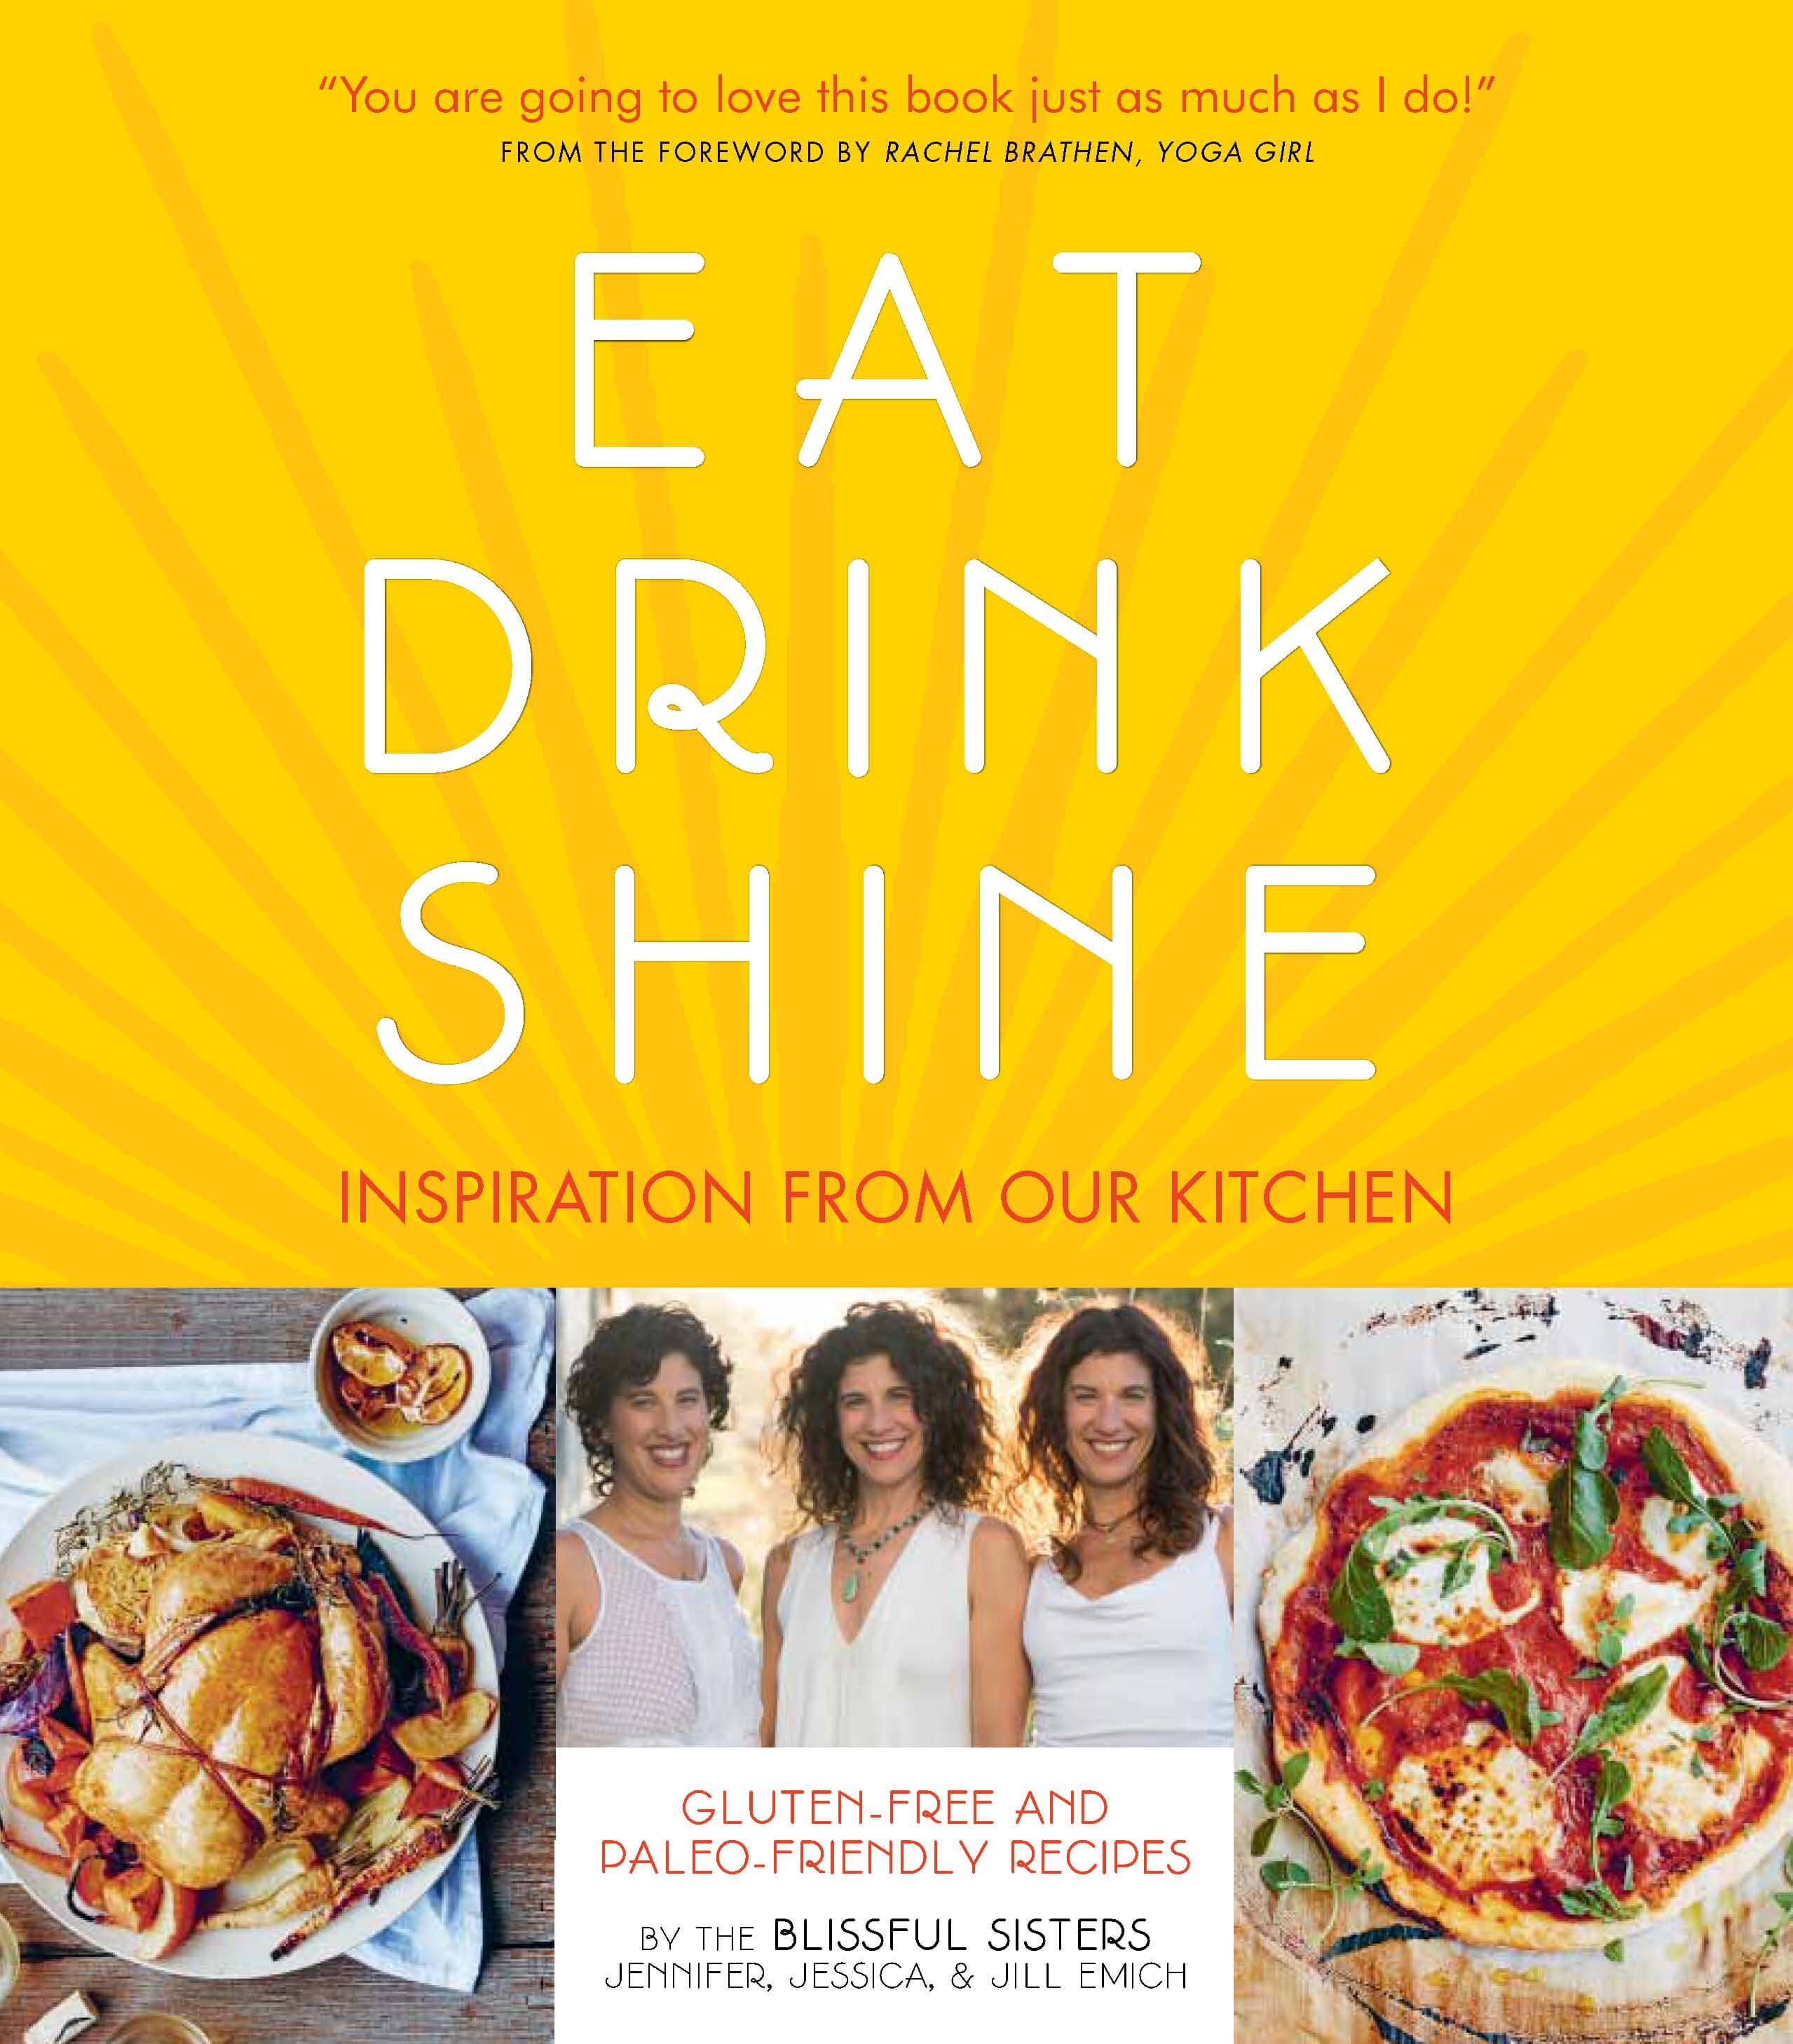 Eat Drink Shine - Paleo and Gluten Free Cookbook from the Blissful Sisters